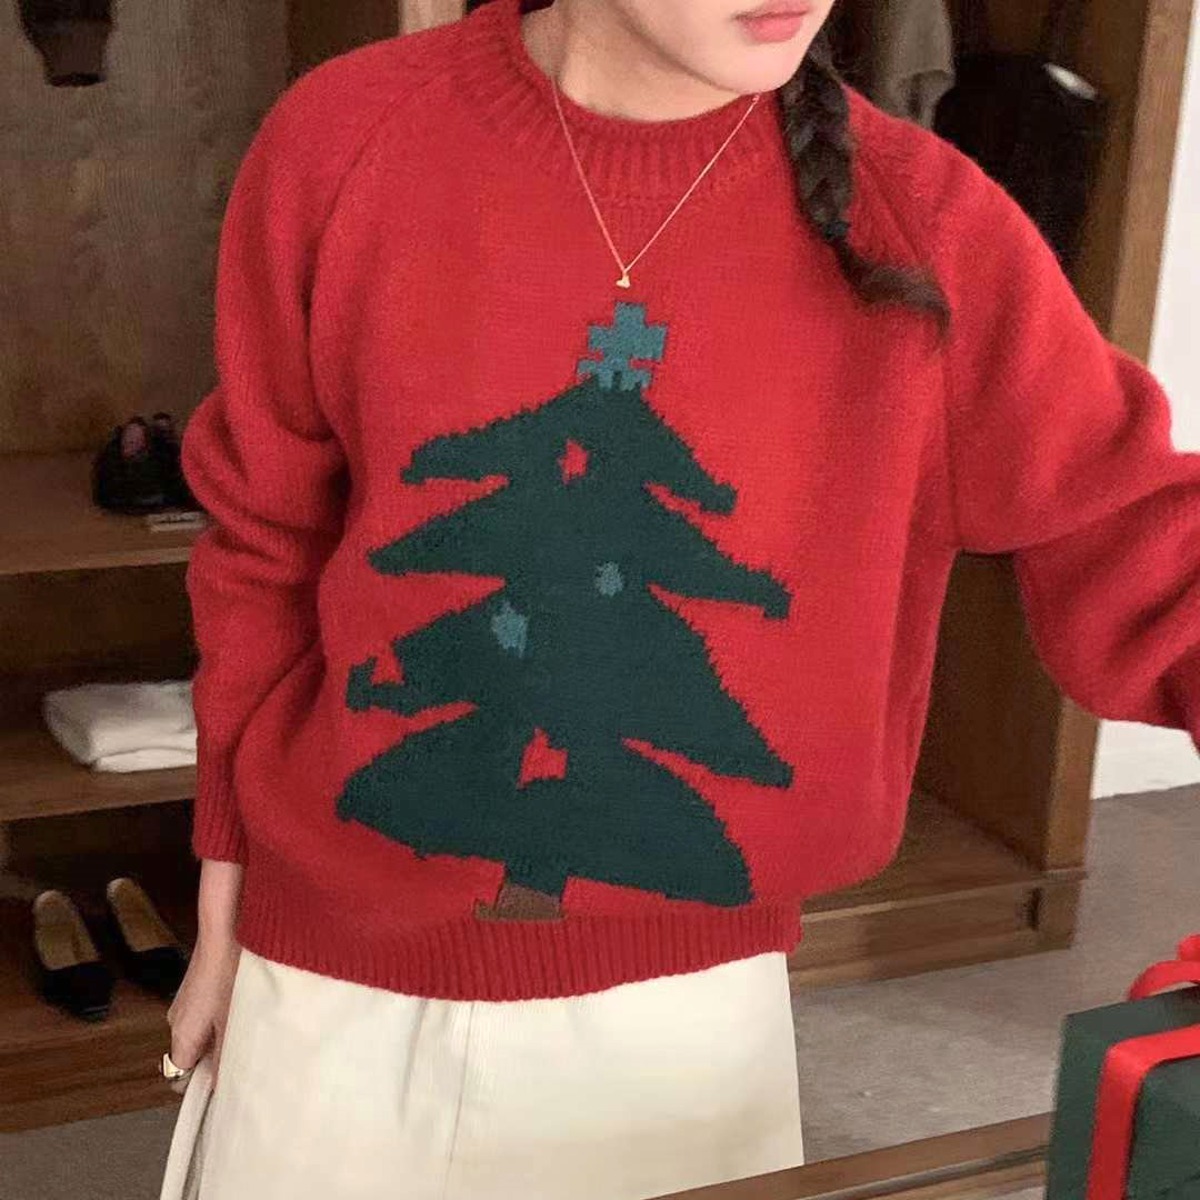 Our Blended Christmas Tree Raglan Round Knitwear